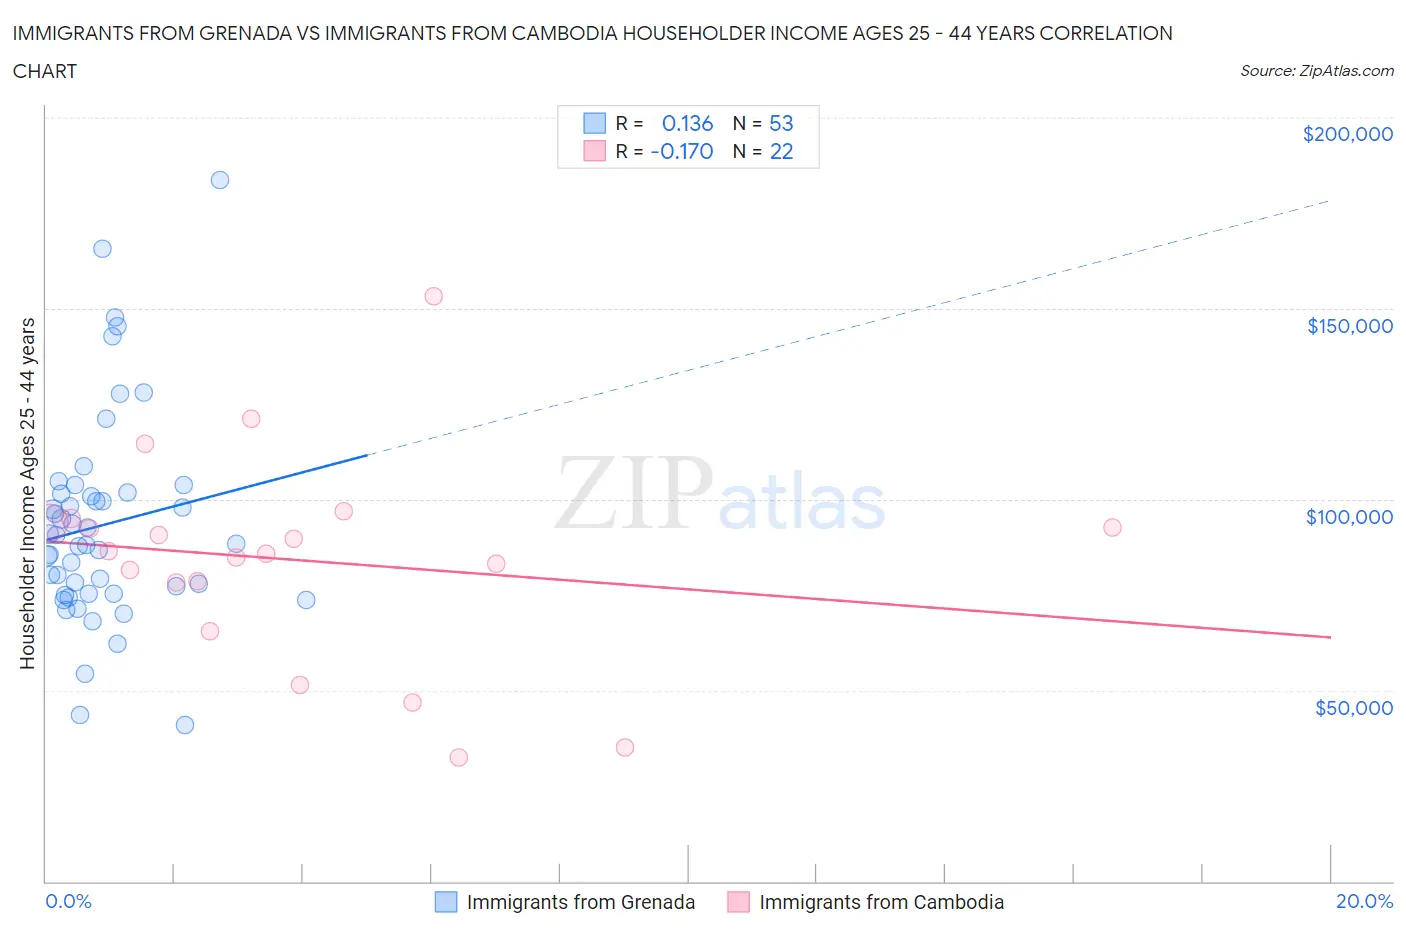 Immigrants from Grenada vs Immigrants from Cambodia Householder Income Ages 25 - 44 years